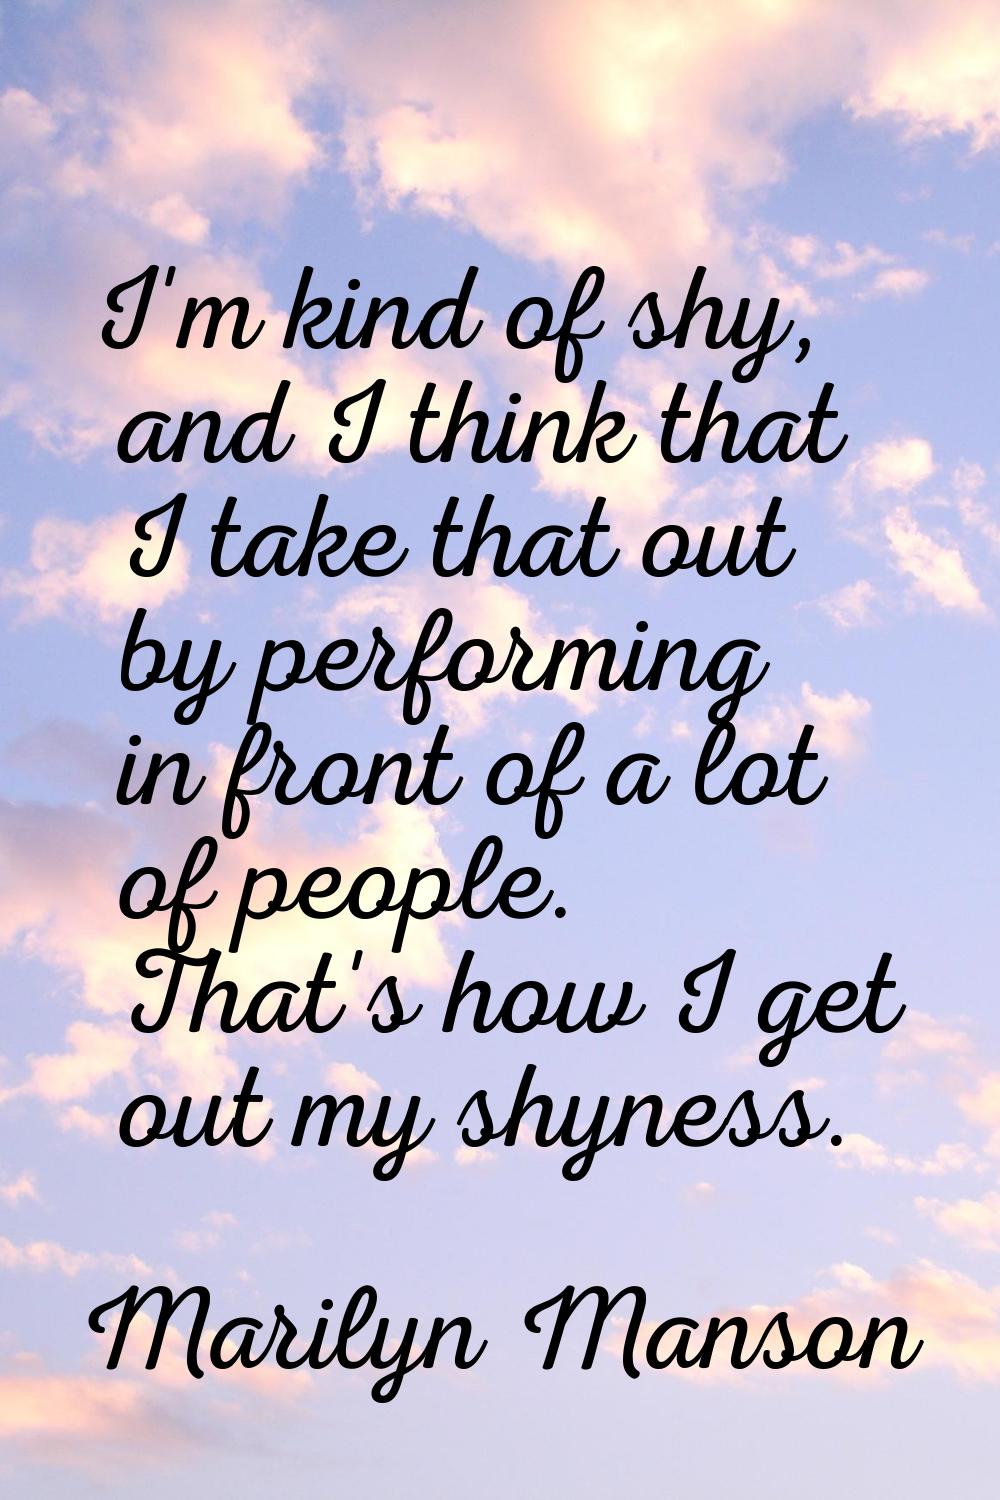 I'm kind of shy, and I think that I take that out by performing in front of a lot of people. That's